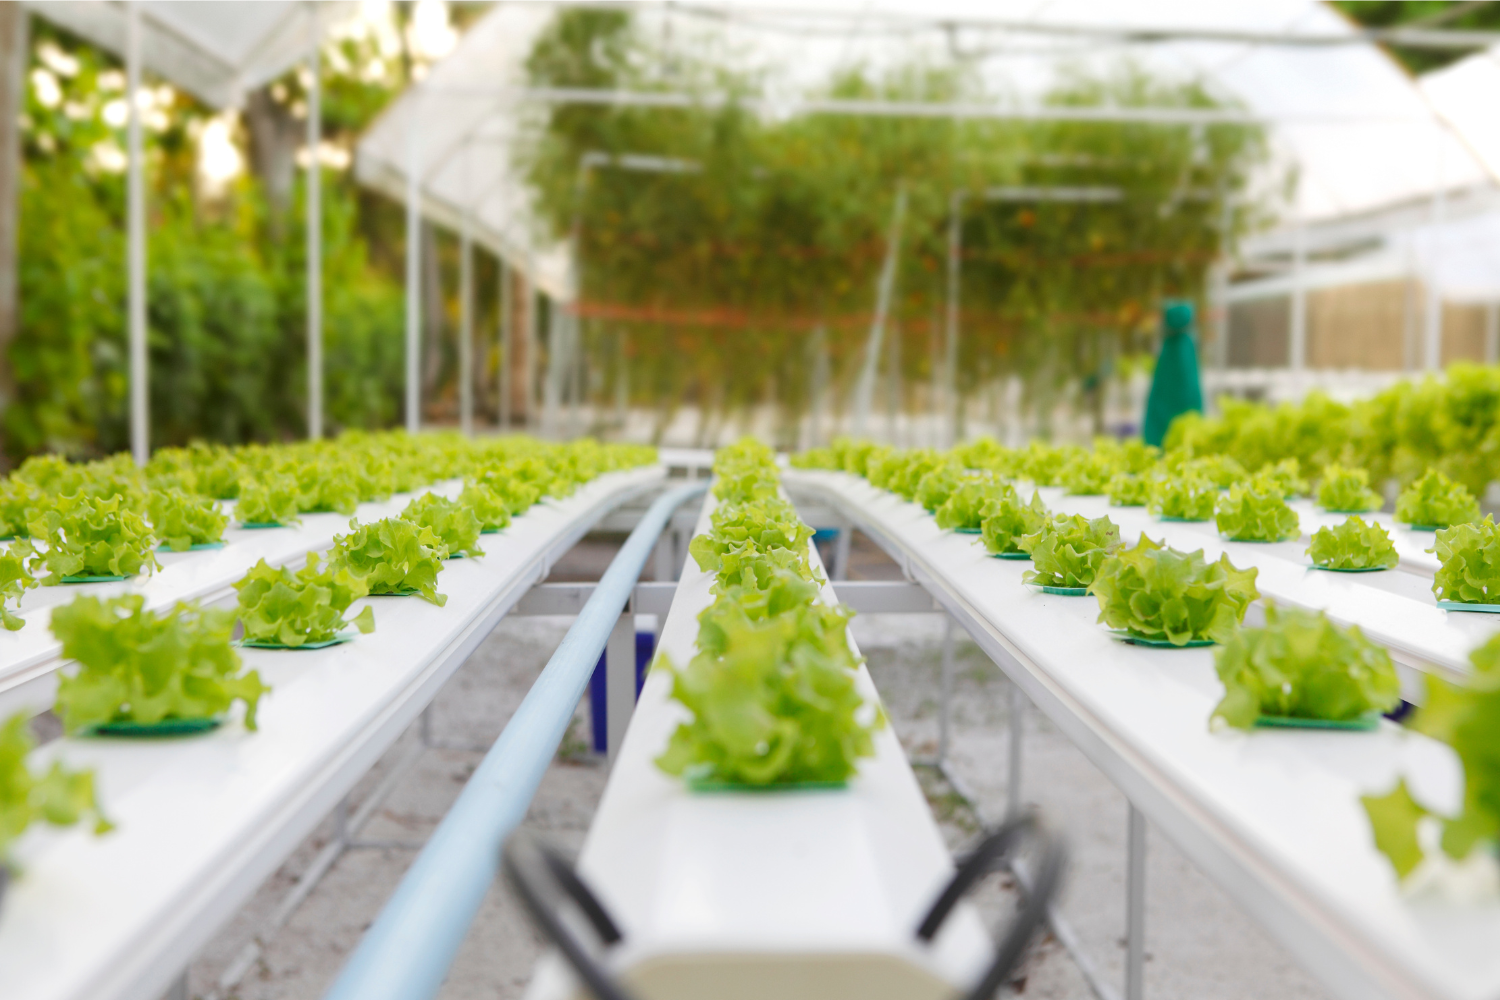 What Are the Best Fertilizers to Use in Hydroponics?